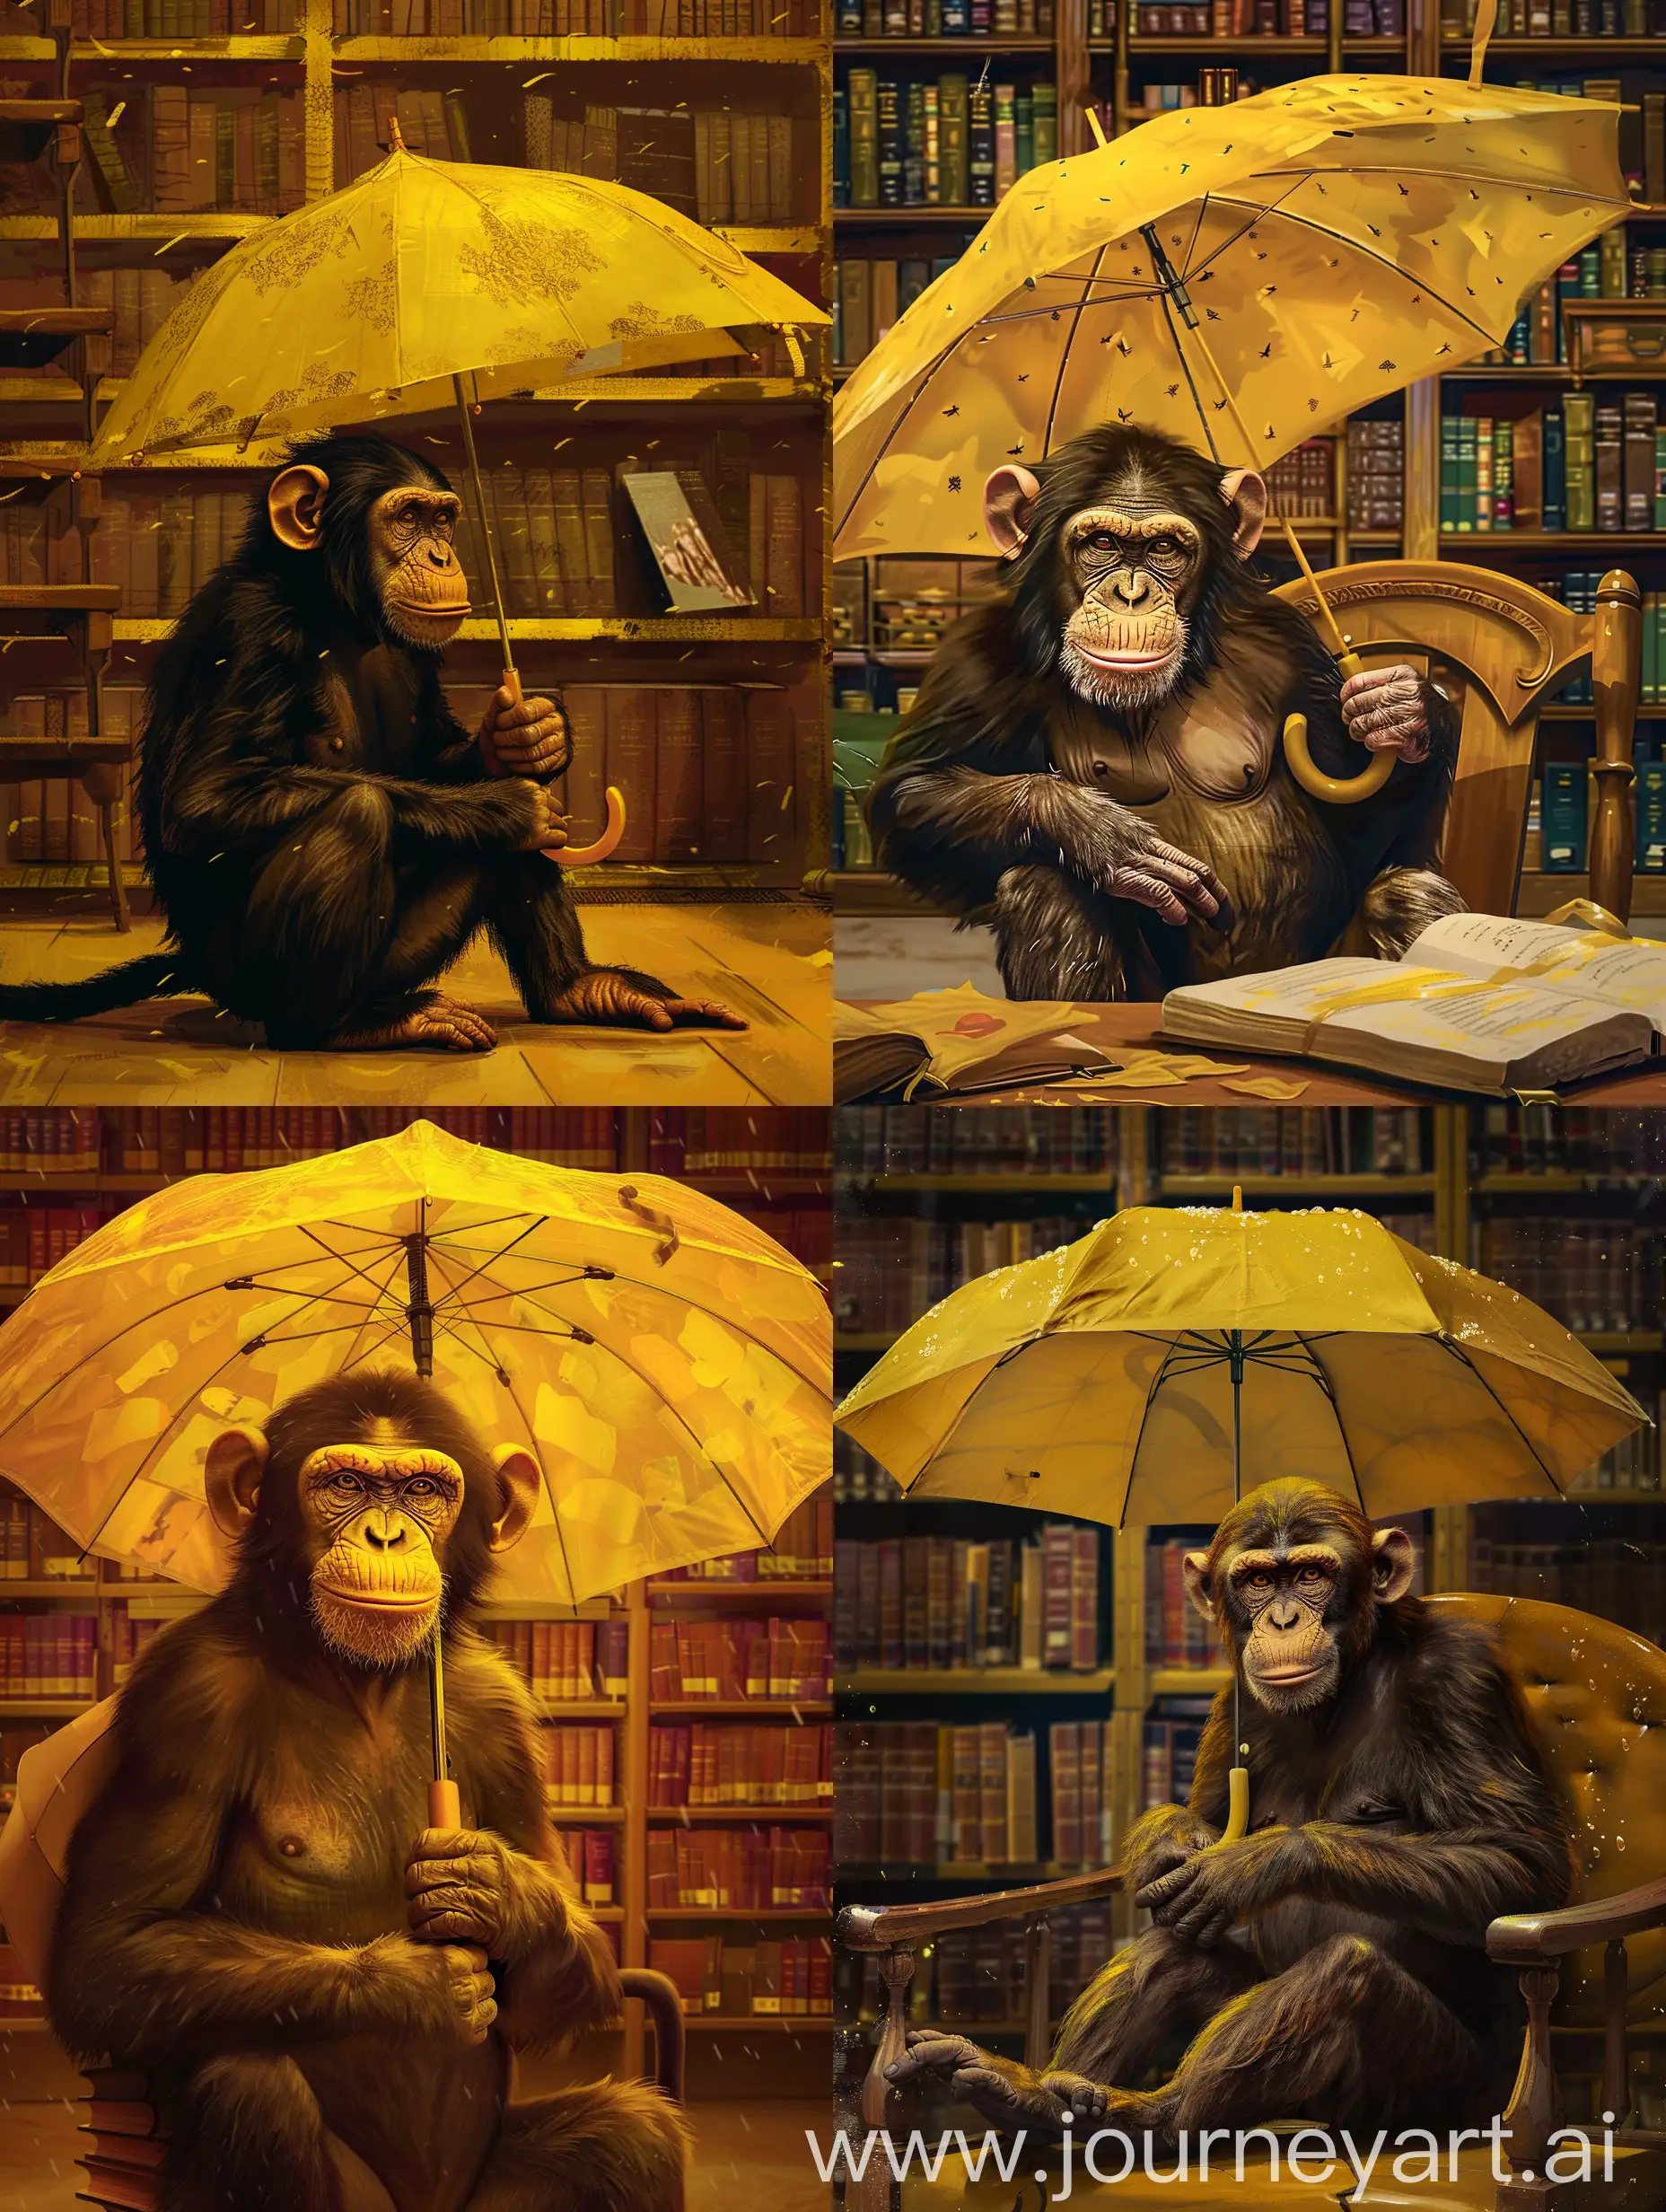 Surrealistic-Yellow-Monkey-with-Umbrella-in-Library